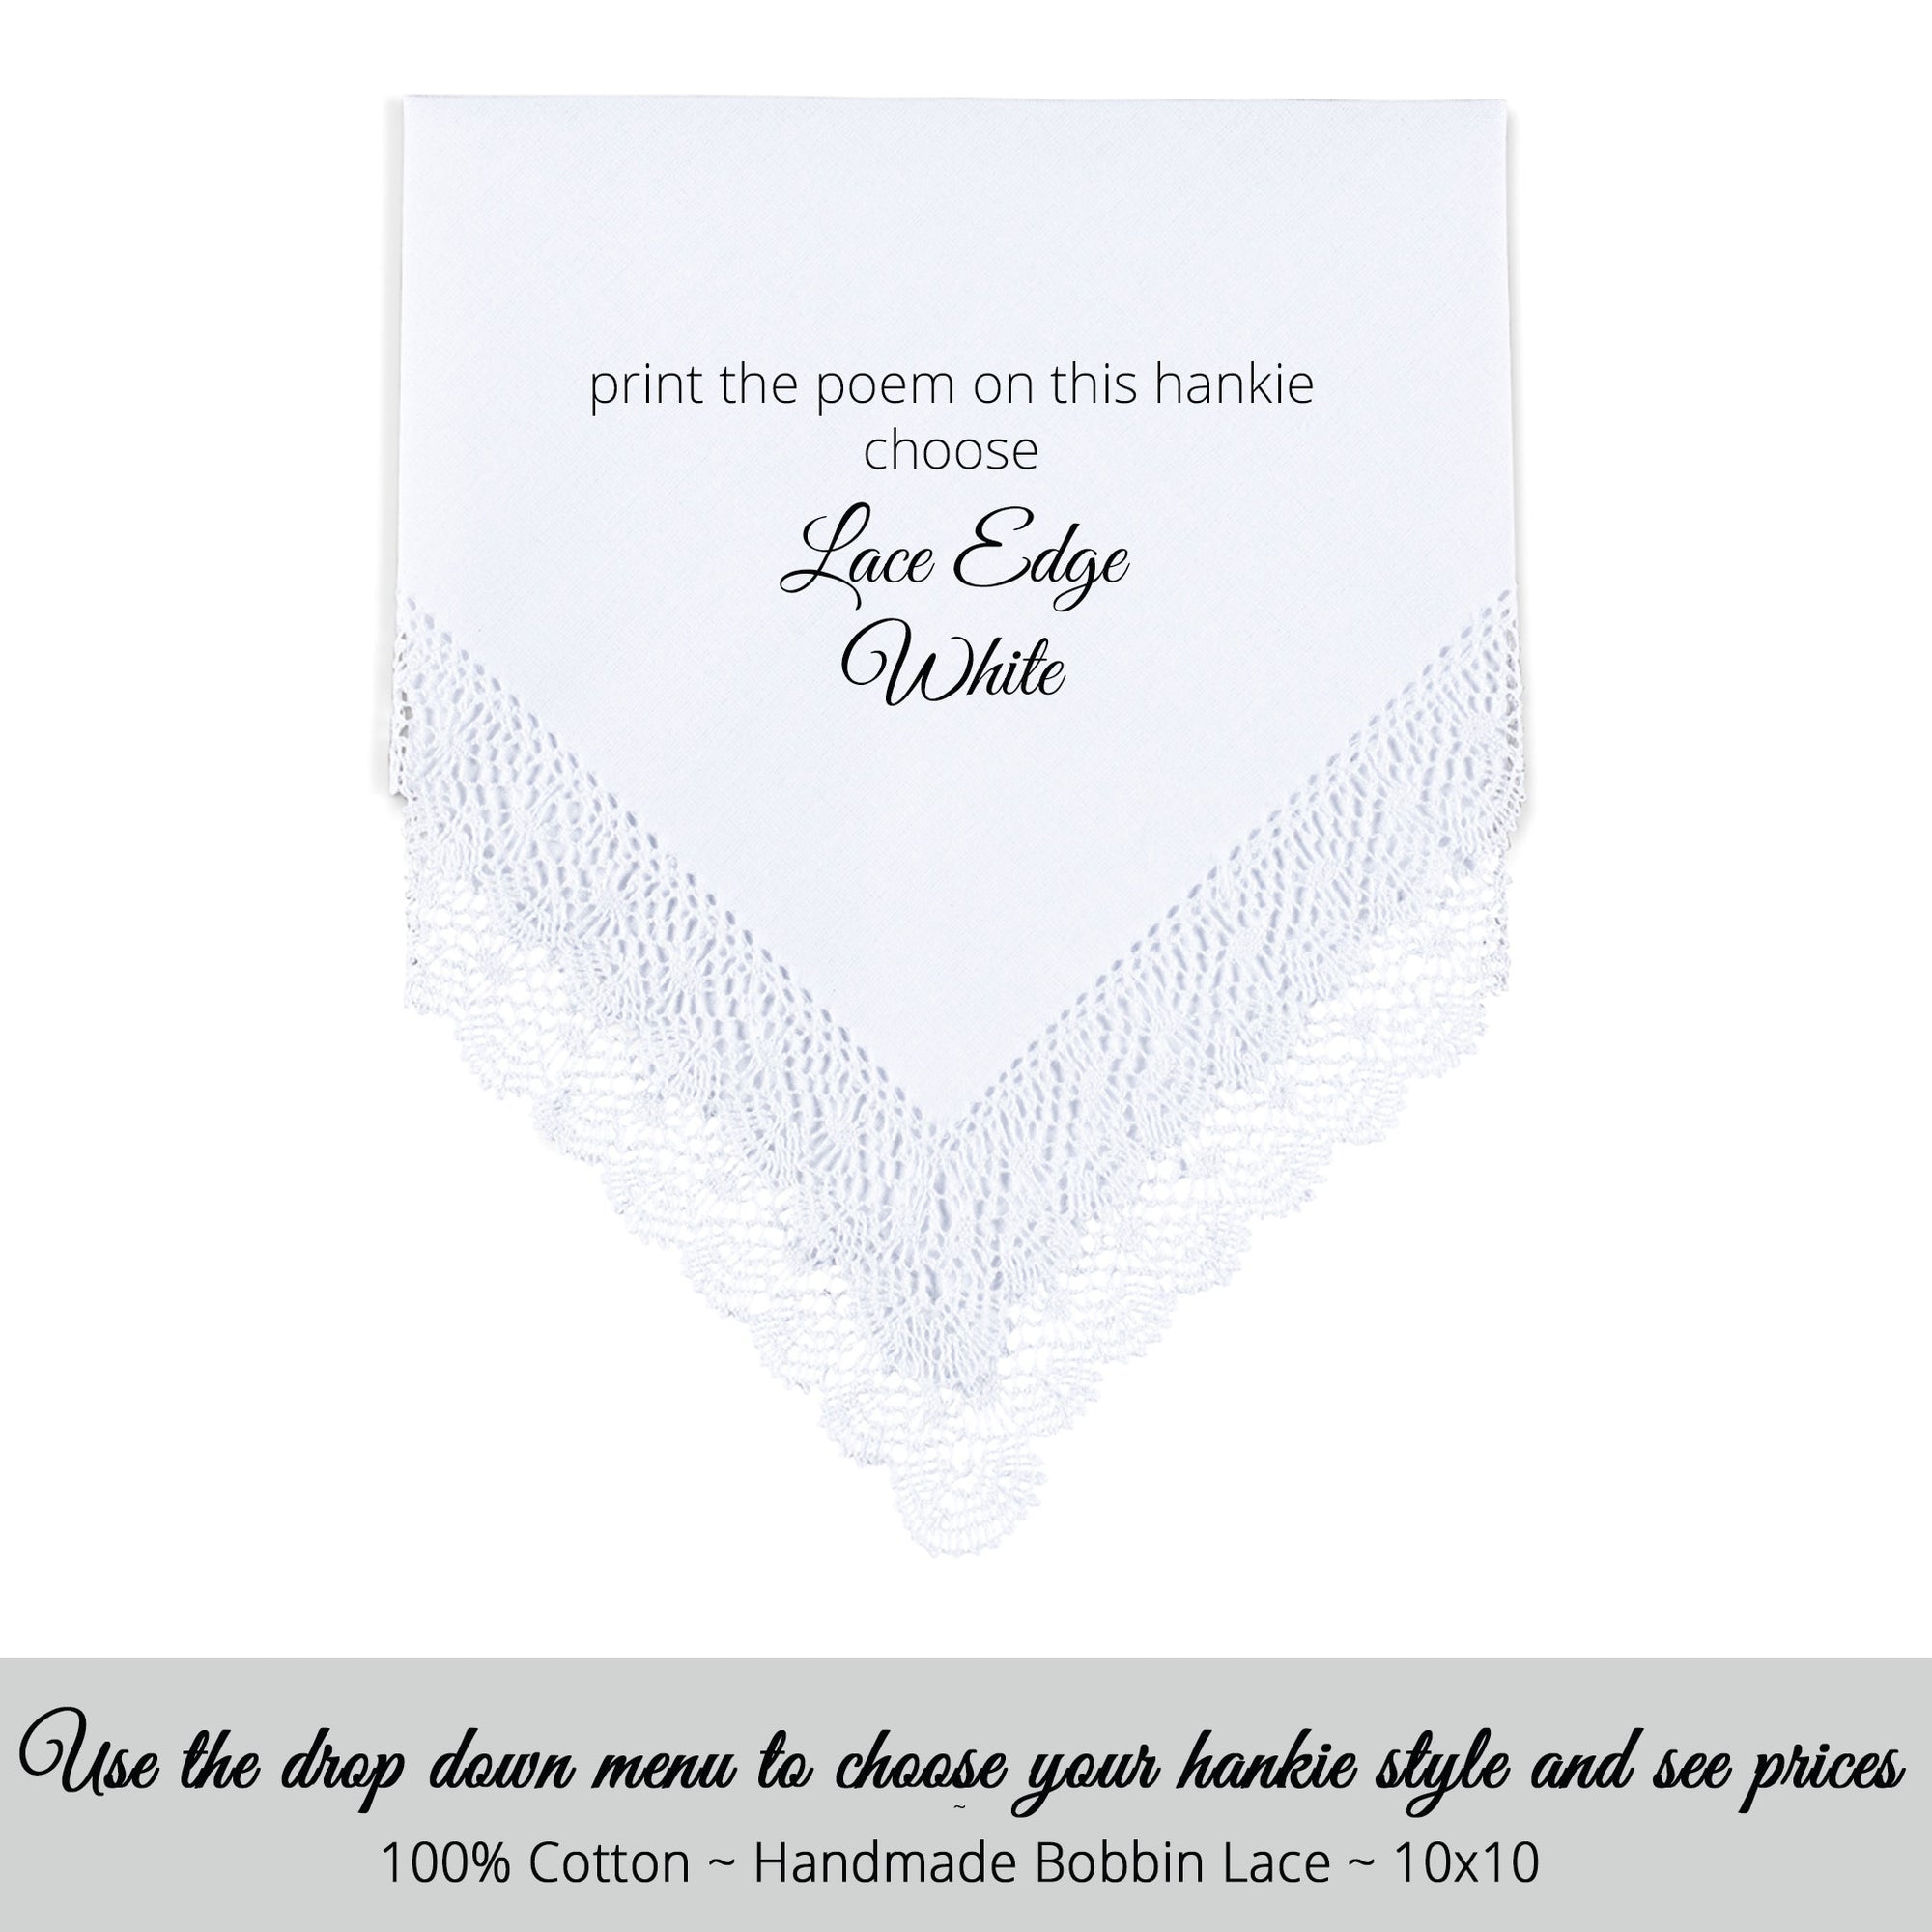 Wedding Handkerchief white with bobbin lace poem printed hankie for the mother of the bride